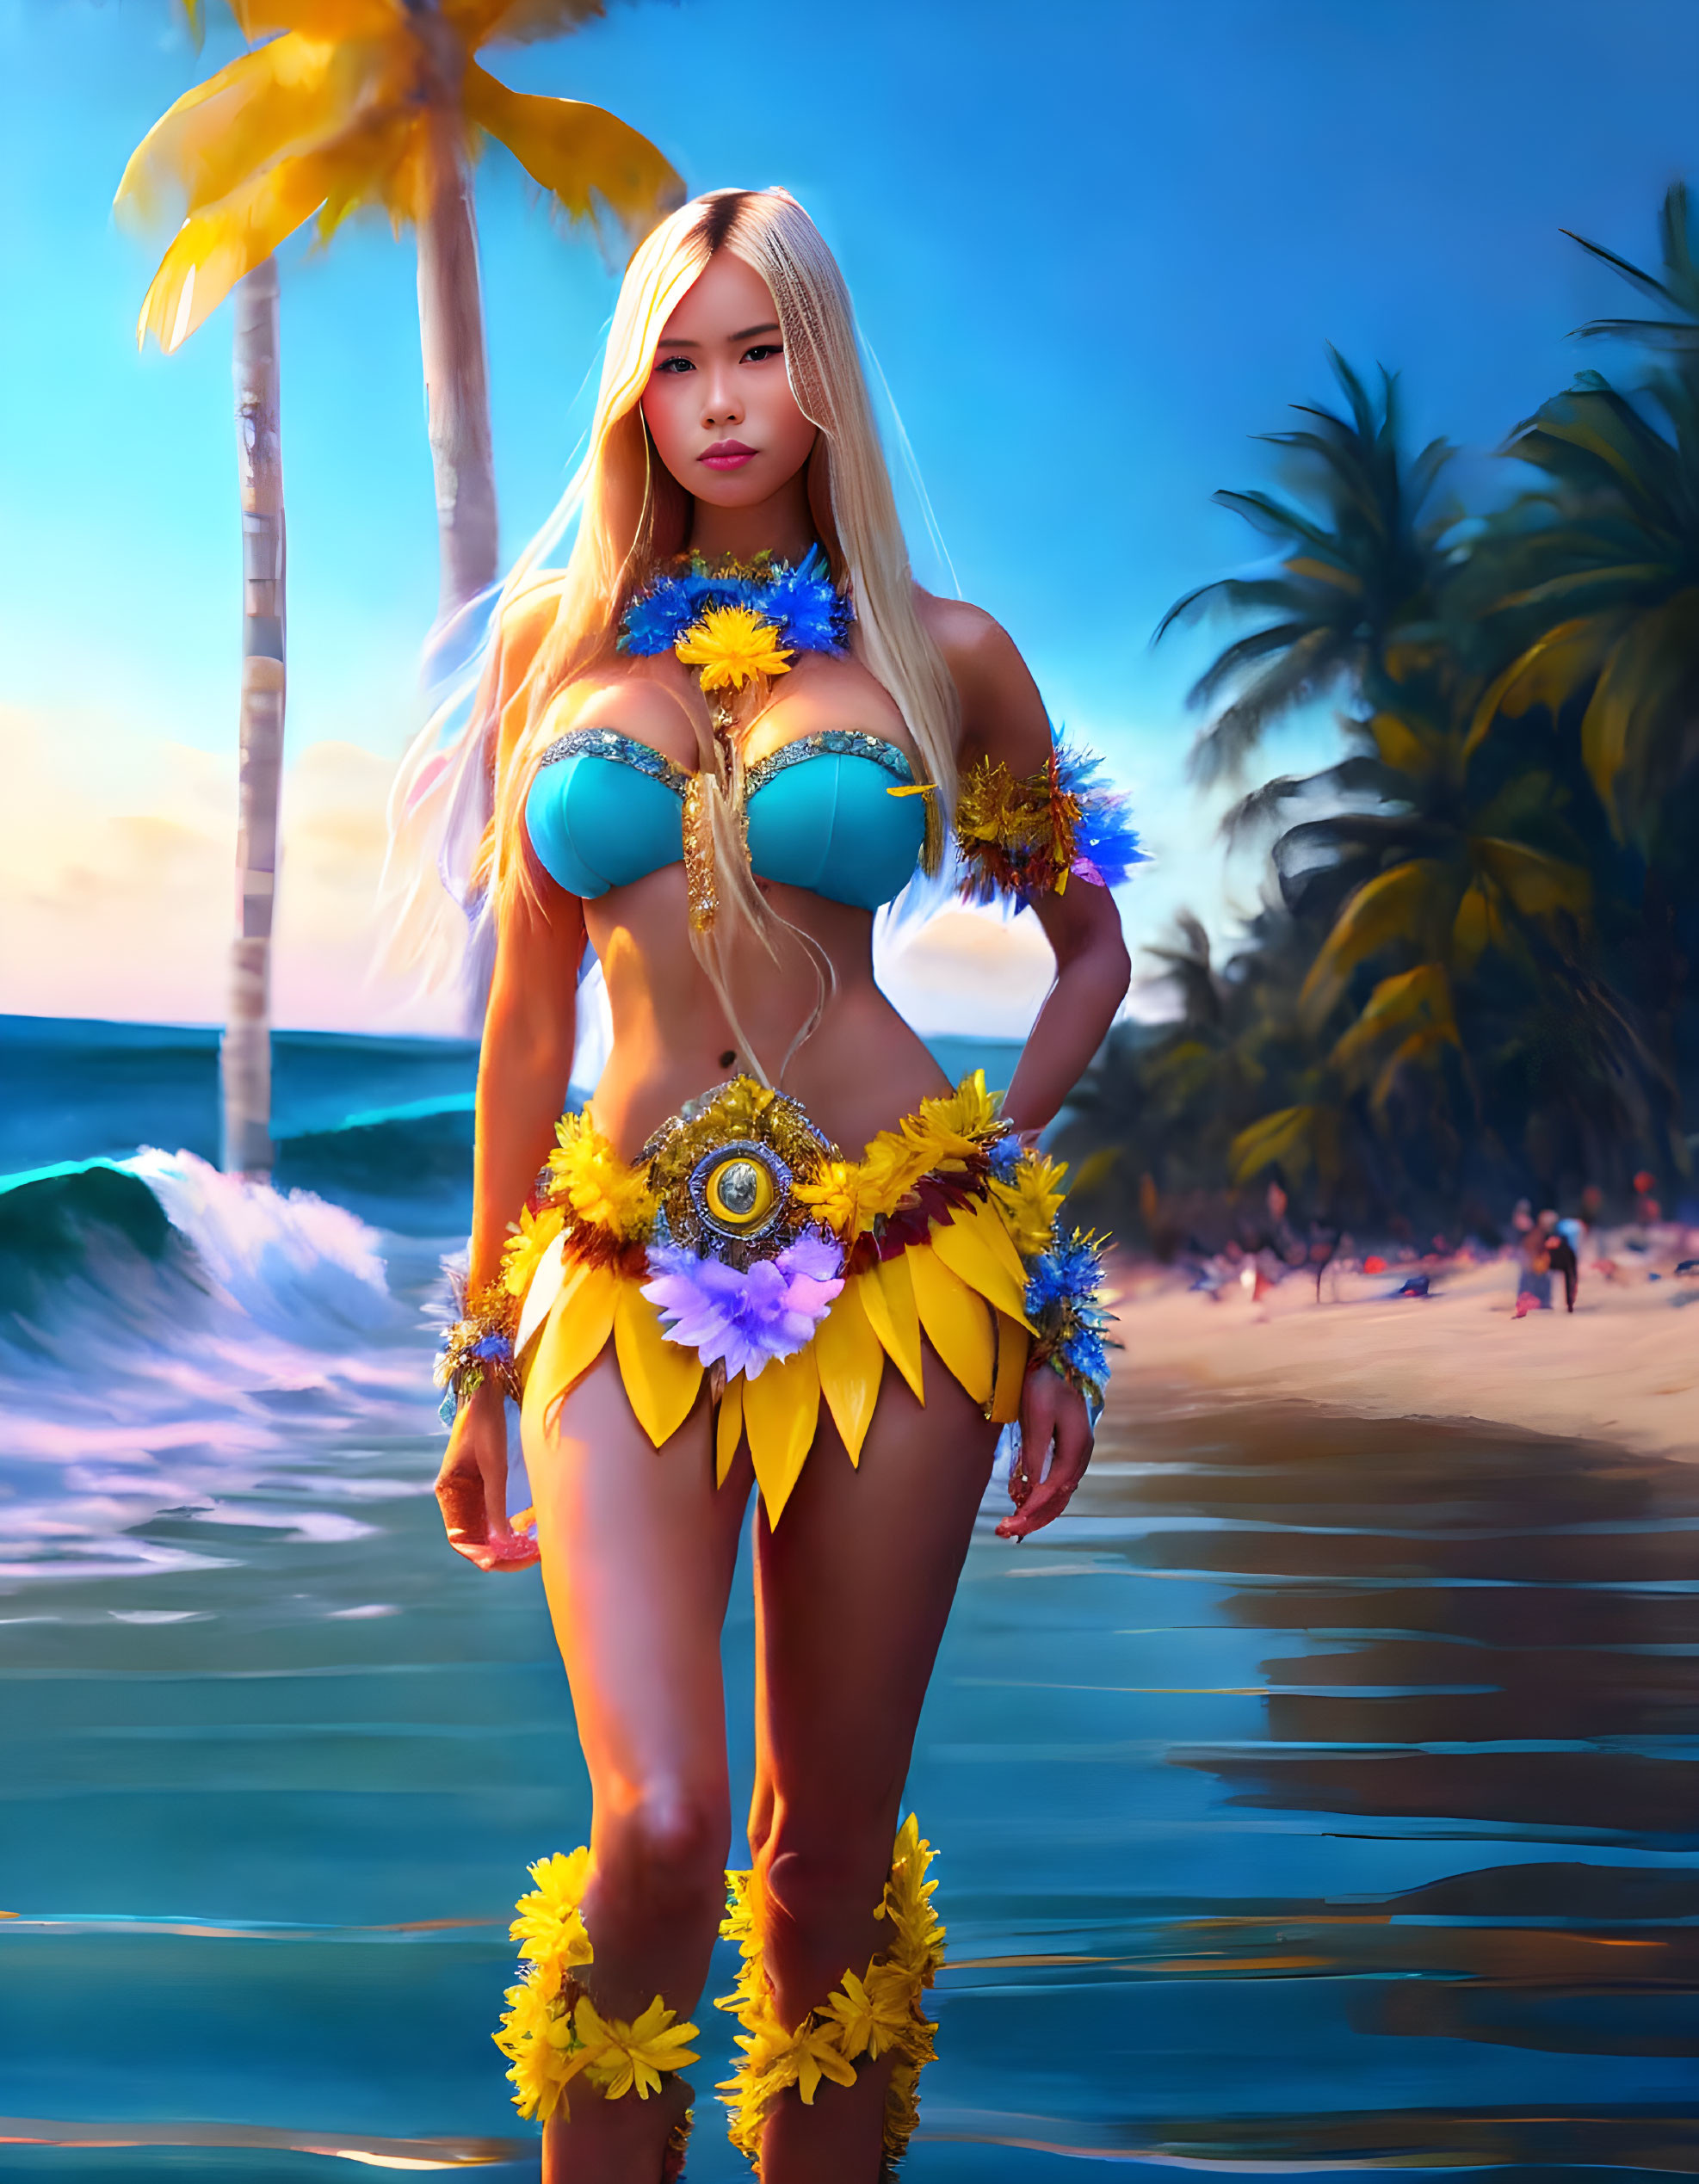 Colorful Bikini-Clad Character on Beach with Palm Trees at Sunset